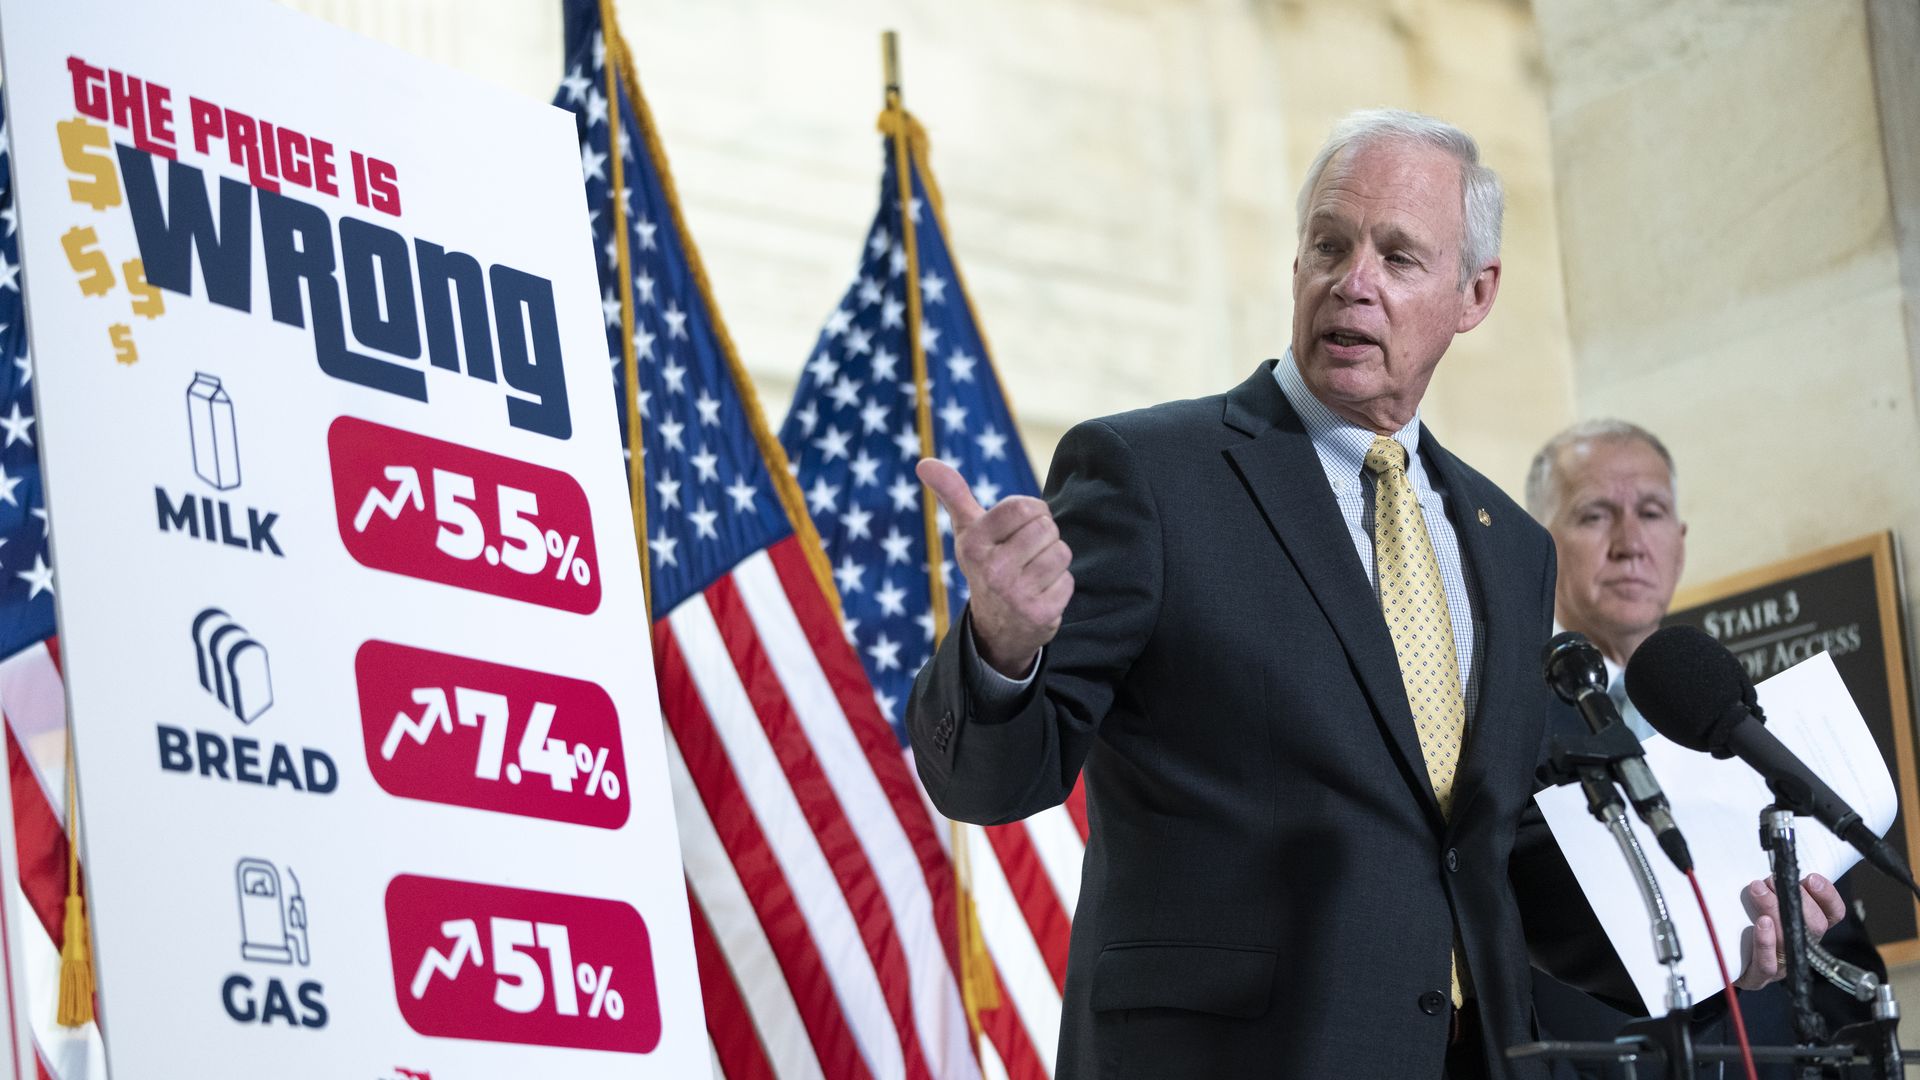 Republicans are seen with a sign highlighting recent consumer price hikes.